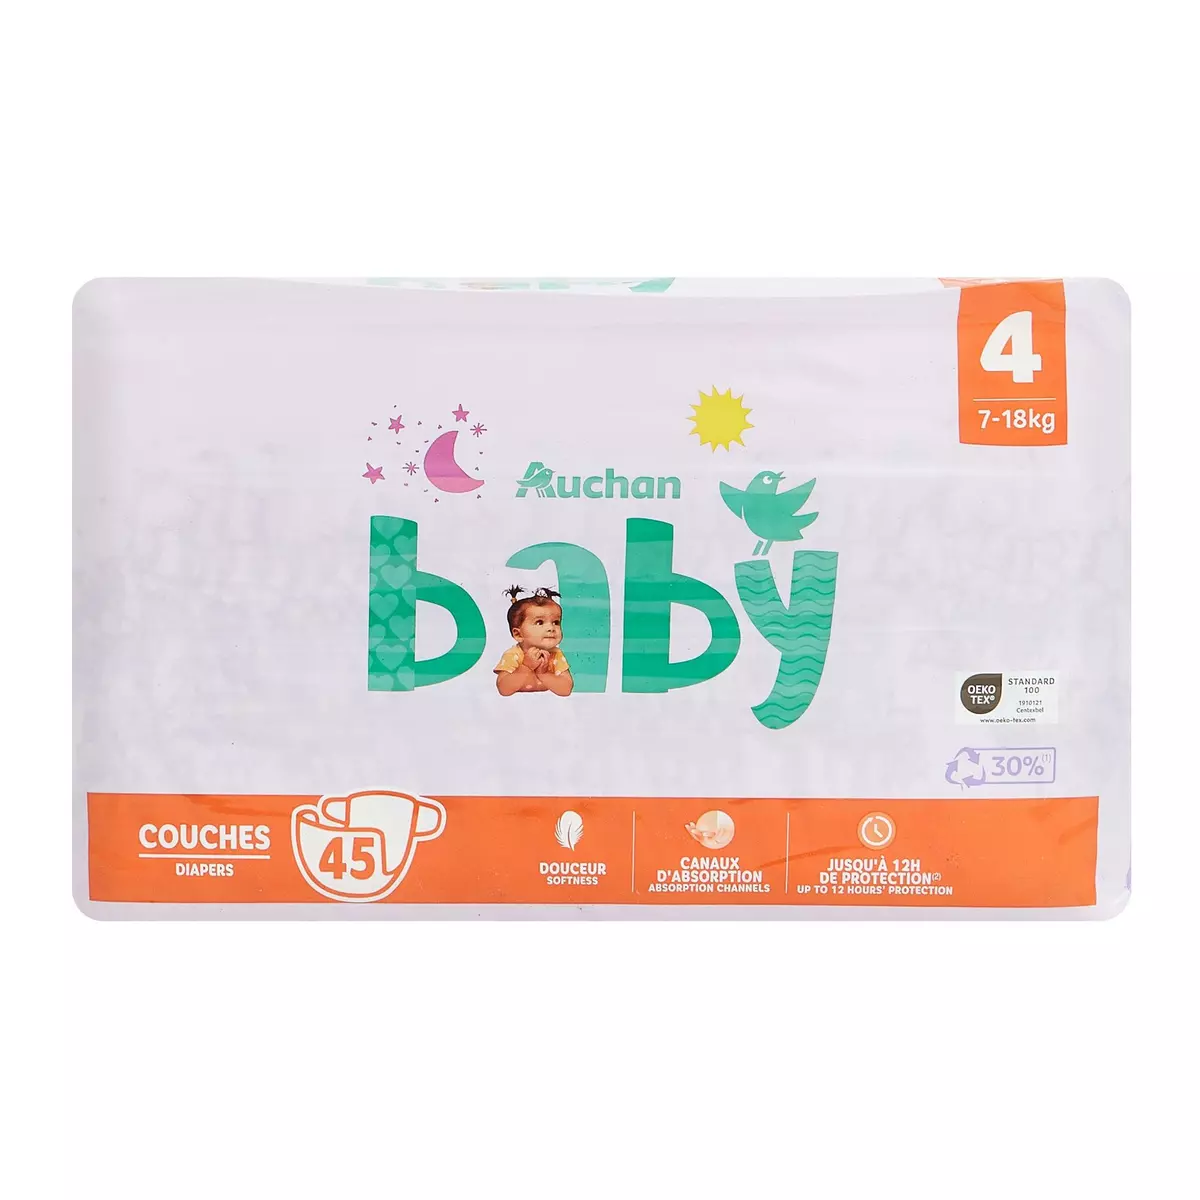 AUCHAN BABY Couches taille 4 (7-18kg) 45 couches